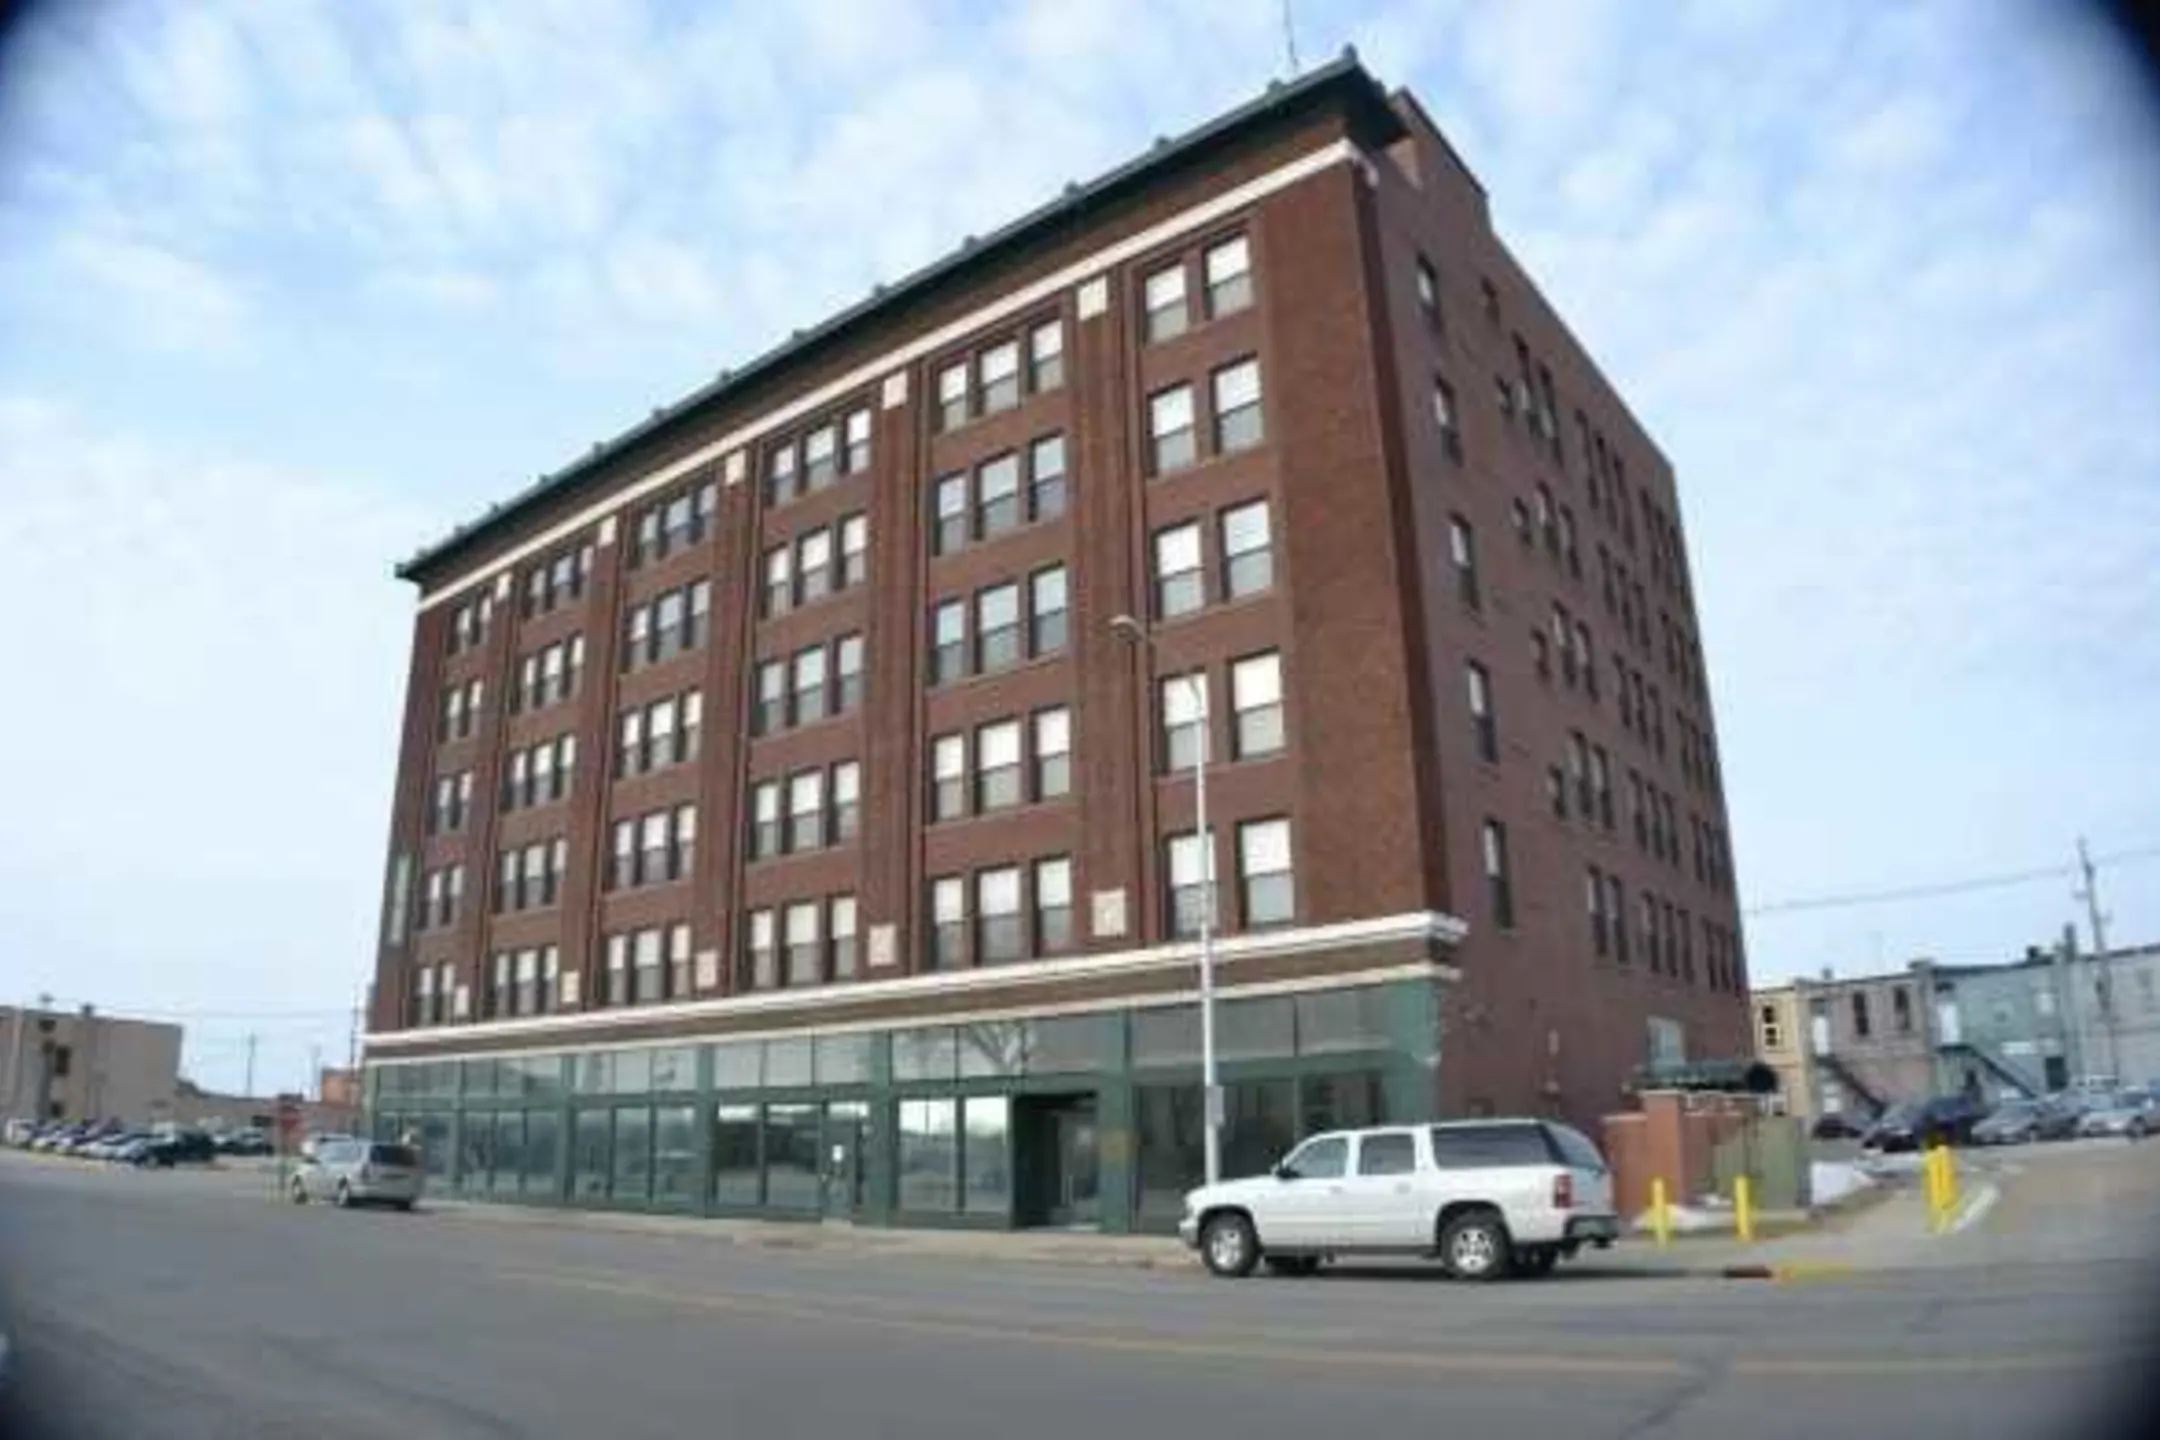 The Lofts At Lea Center 139 East Williams St Albert Lea Mn Apartments For Rent Rent 2922